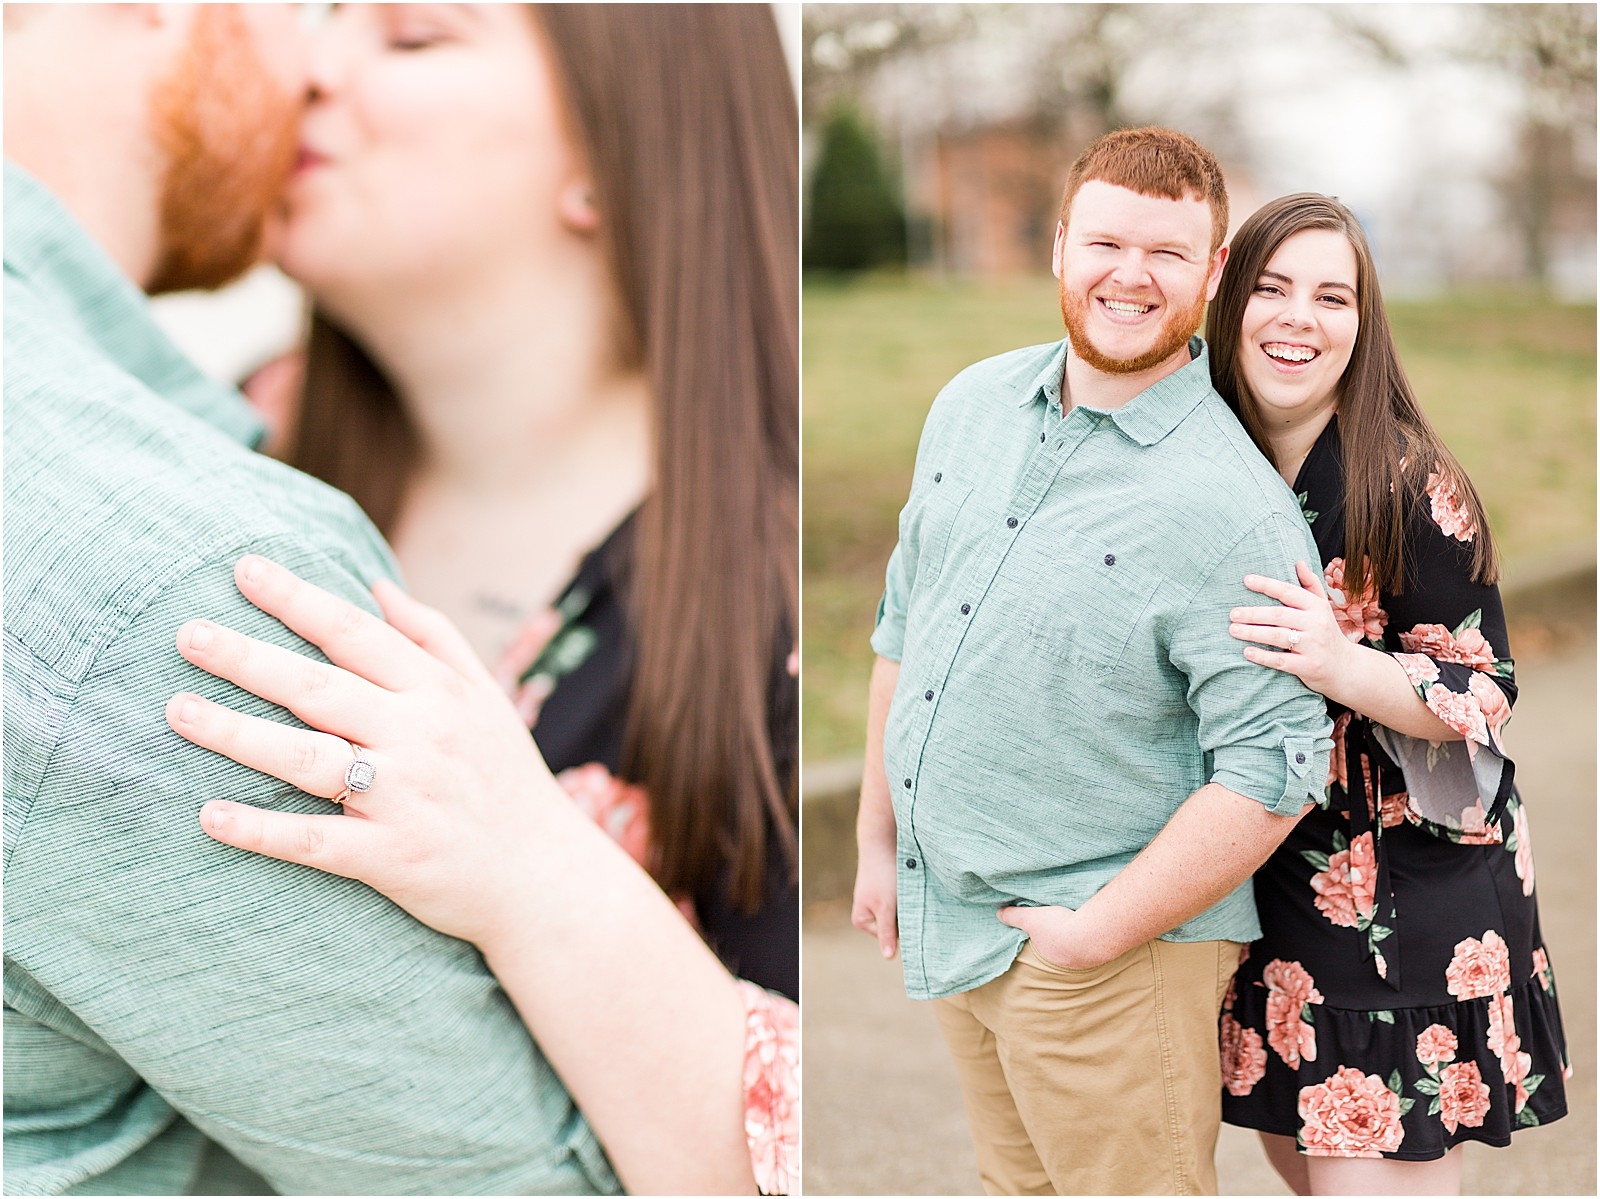 Jocelyn and Austin | Rockport Indiana Engament Session008.jpg